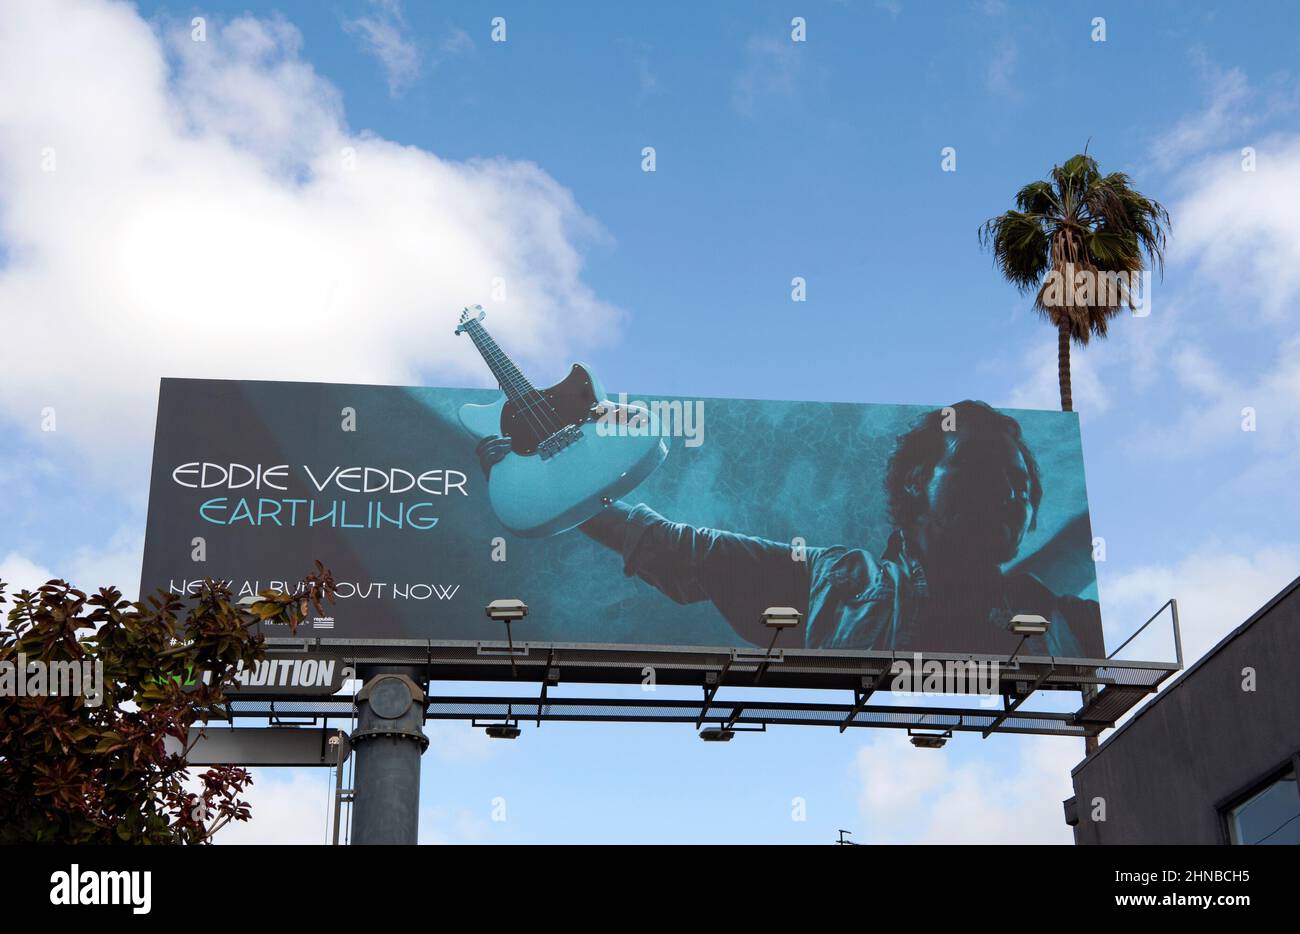 A billboard in Los Angeles announces the release of a new Eddie Vedder album titled Earthling. Stock Photo